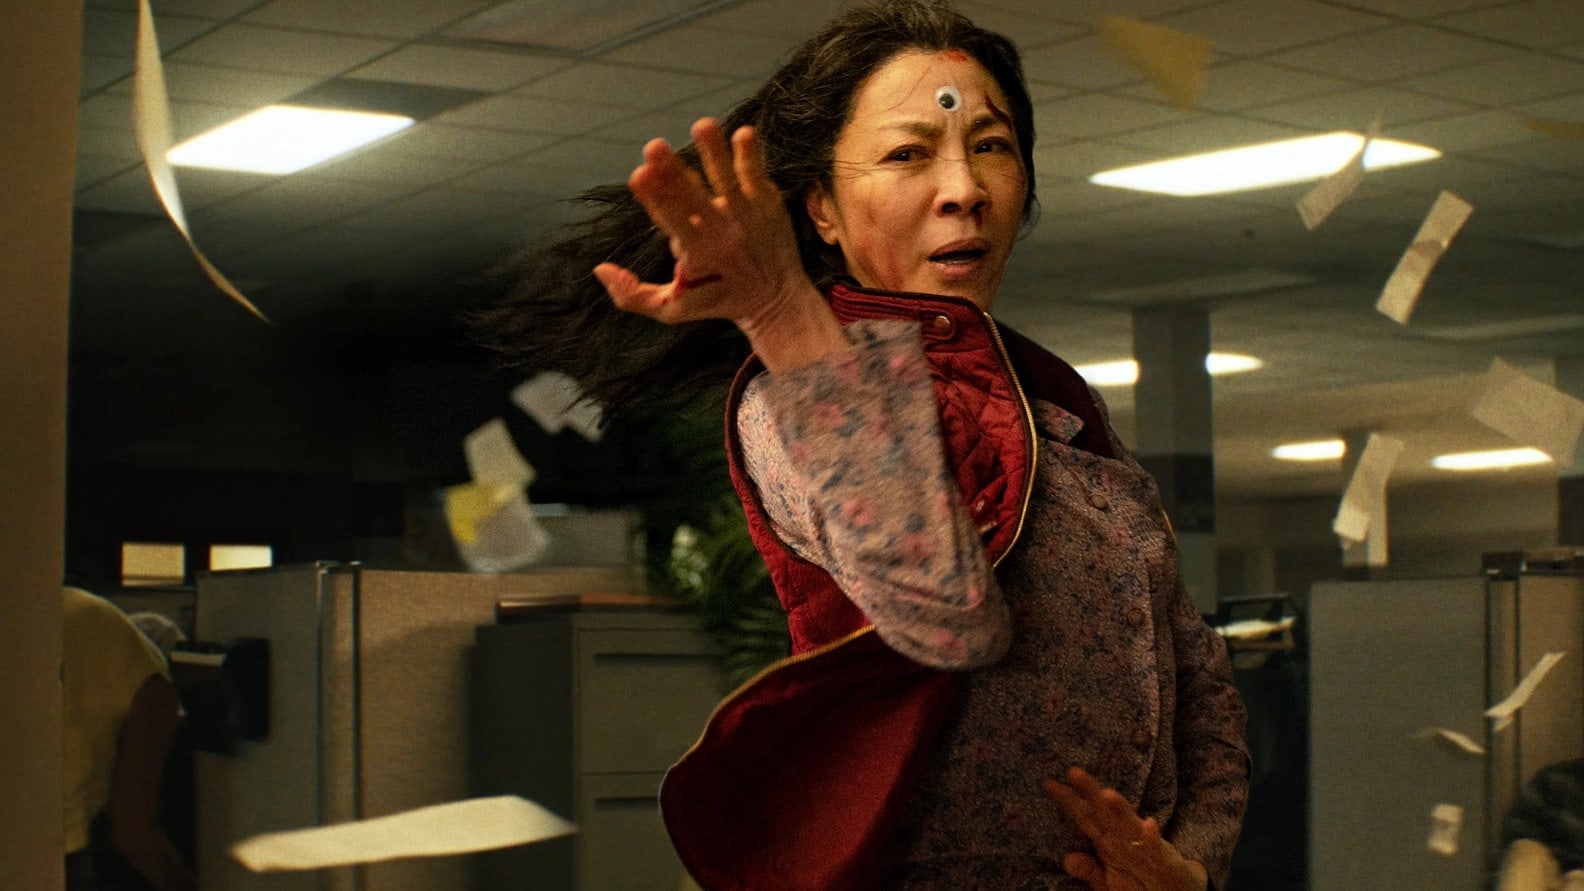 Michelle Yeoh utilisant ses pouvoirs dans Everything Everywhere All At Once